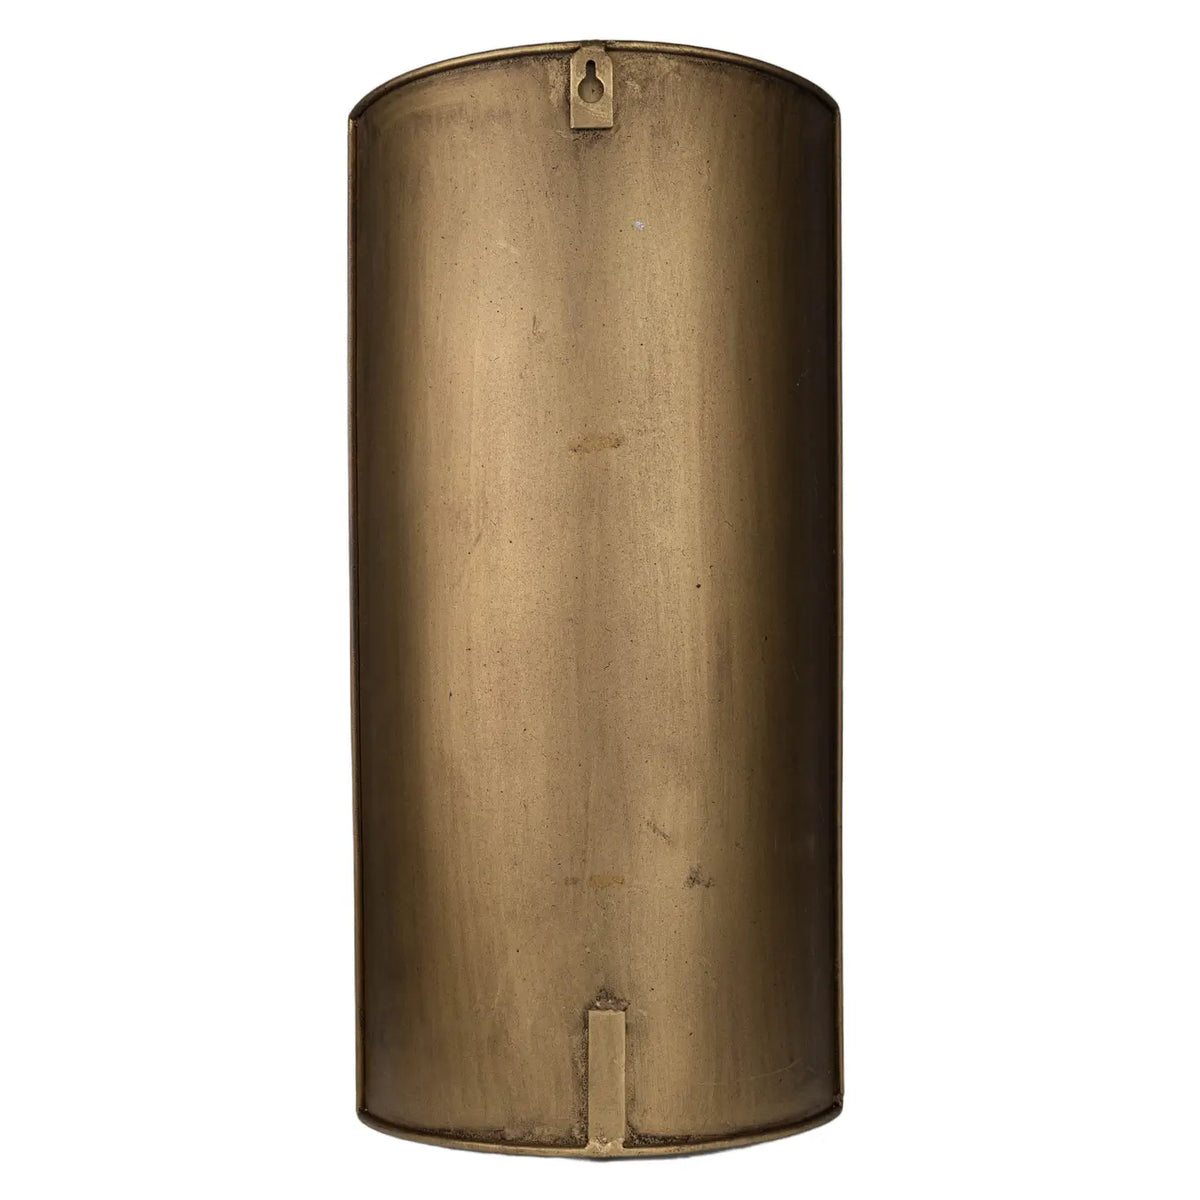 Curved Antique Brass Finished Wall Planter - Holistic Habitat 